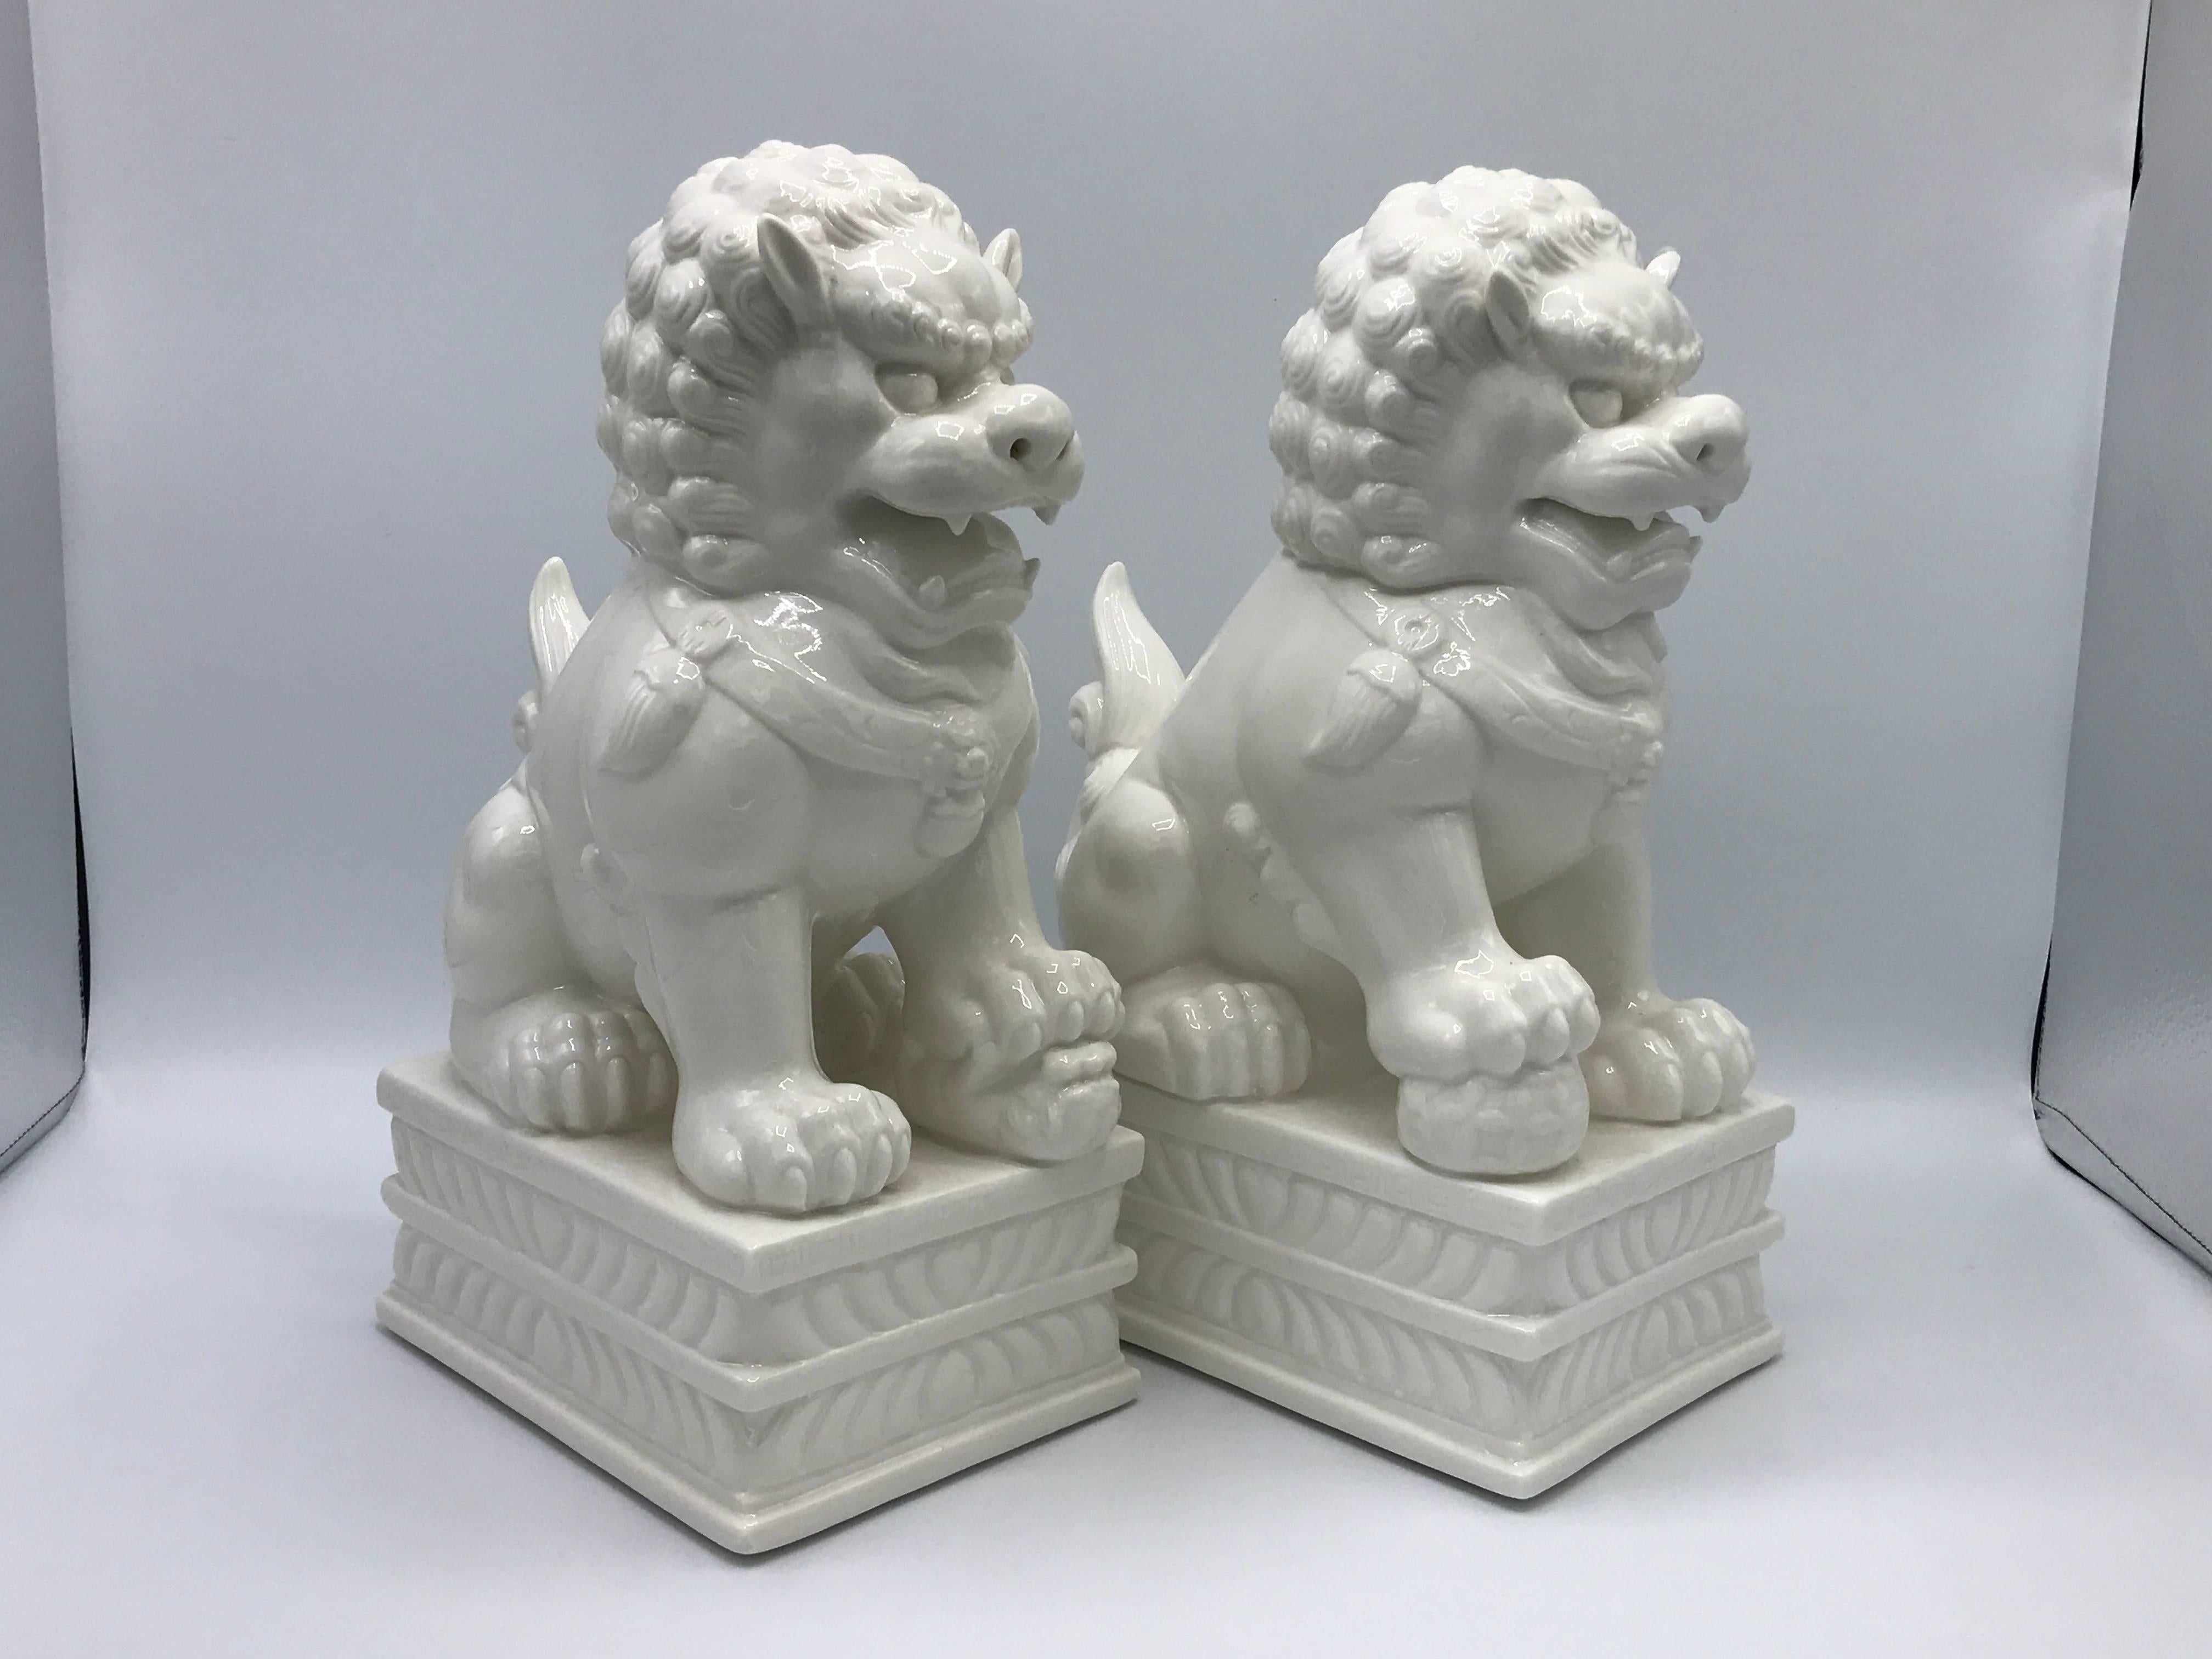 Offered is a stunning pair of 1960s, large foo dog statues. Would make great bookends!